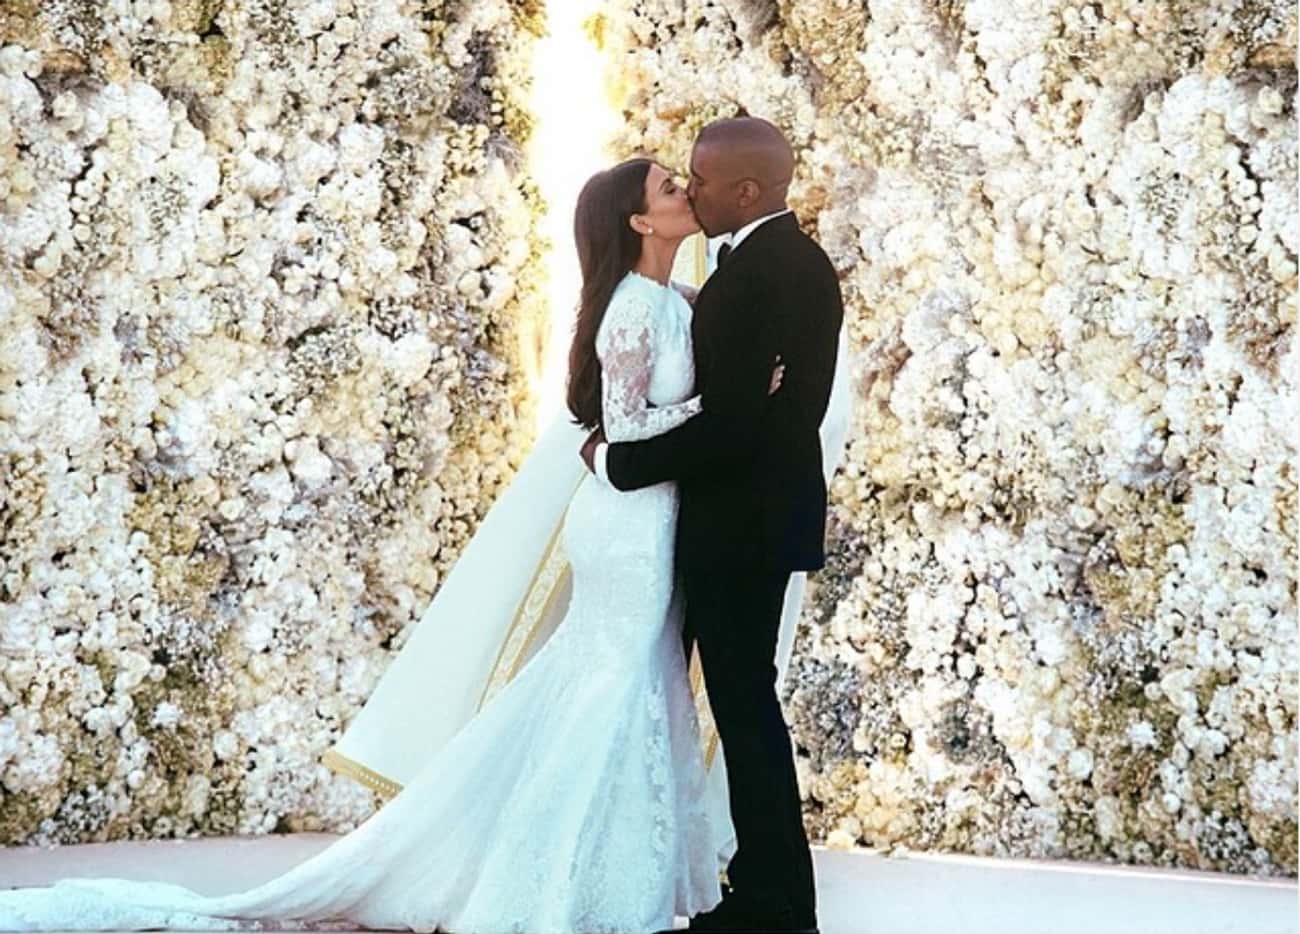 May 2014: Woods Attends Kim Kardashian And Kanye West's Wedding In Italy